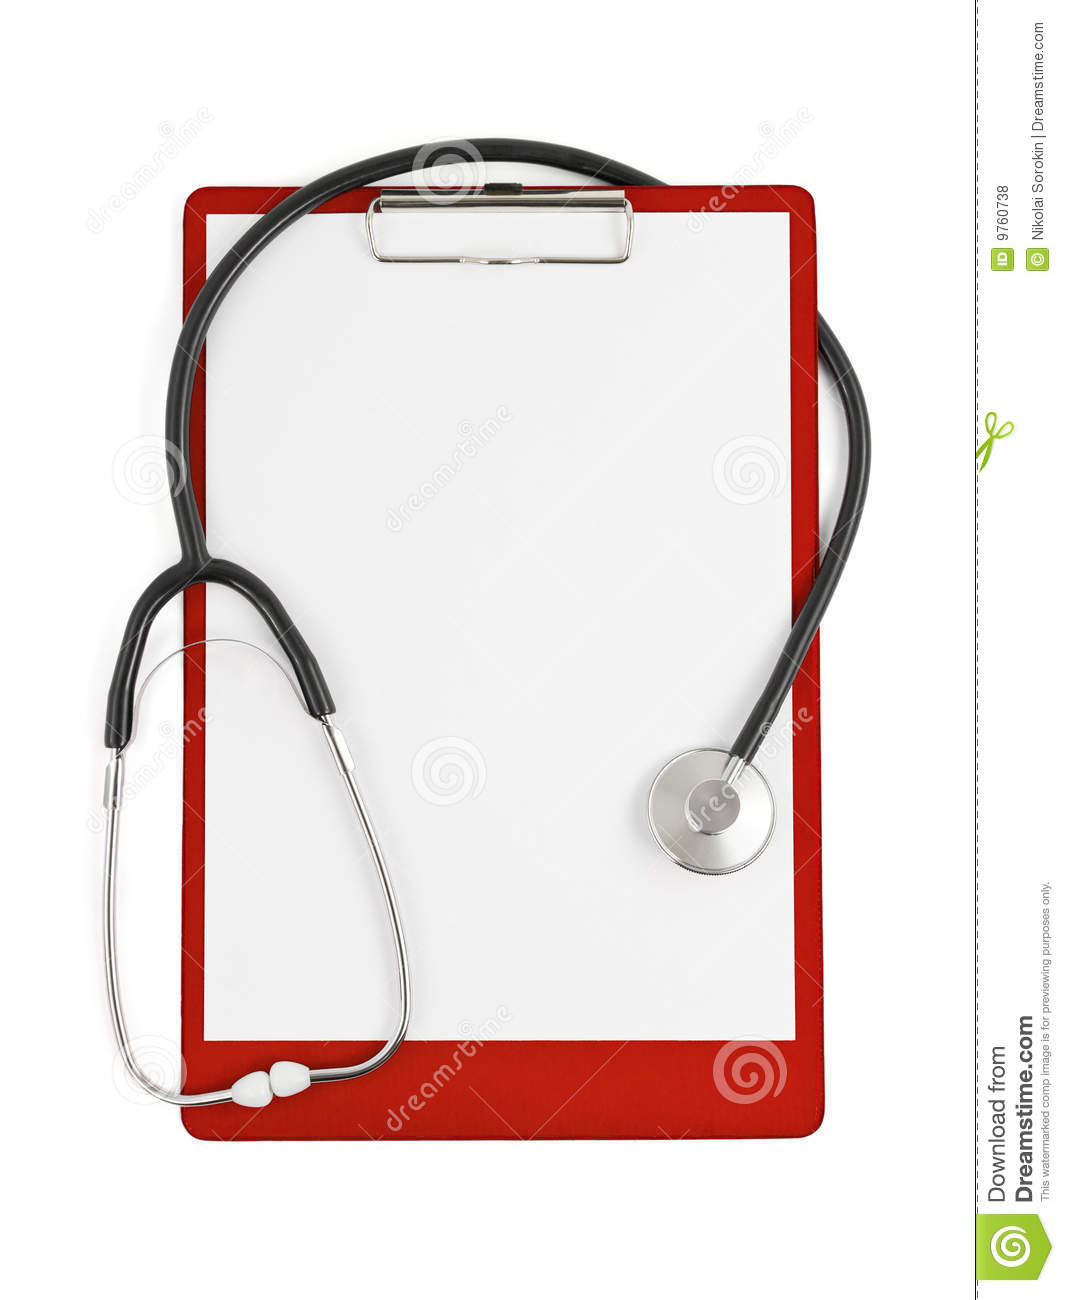 Medical Clipboard And Stethoscope Royalty Free Stock Photos   Image